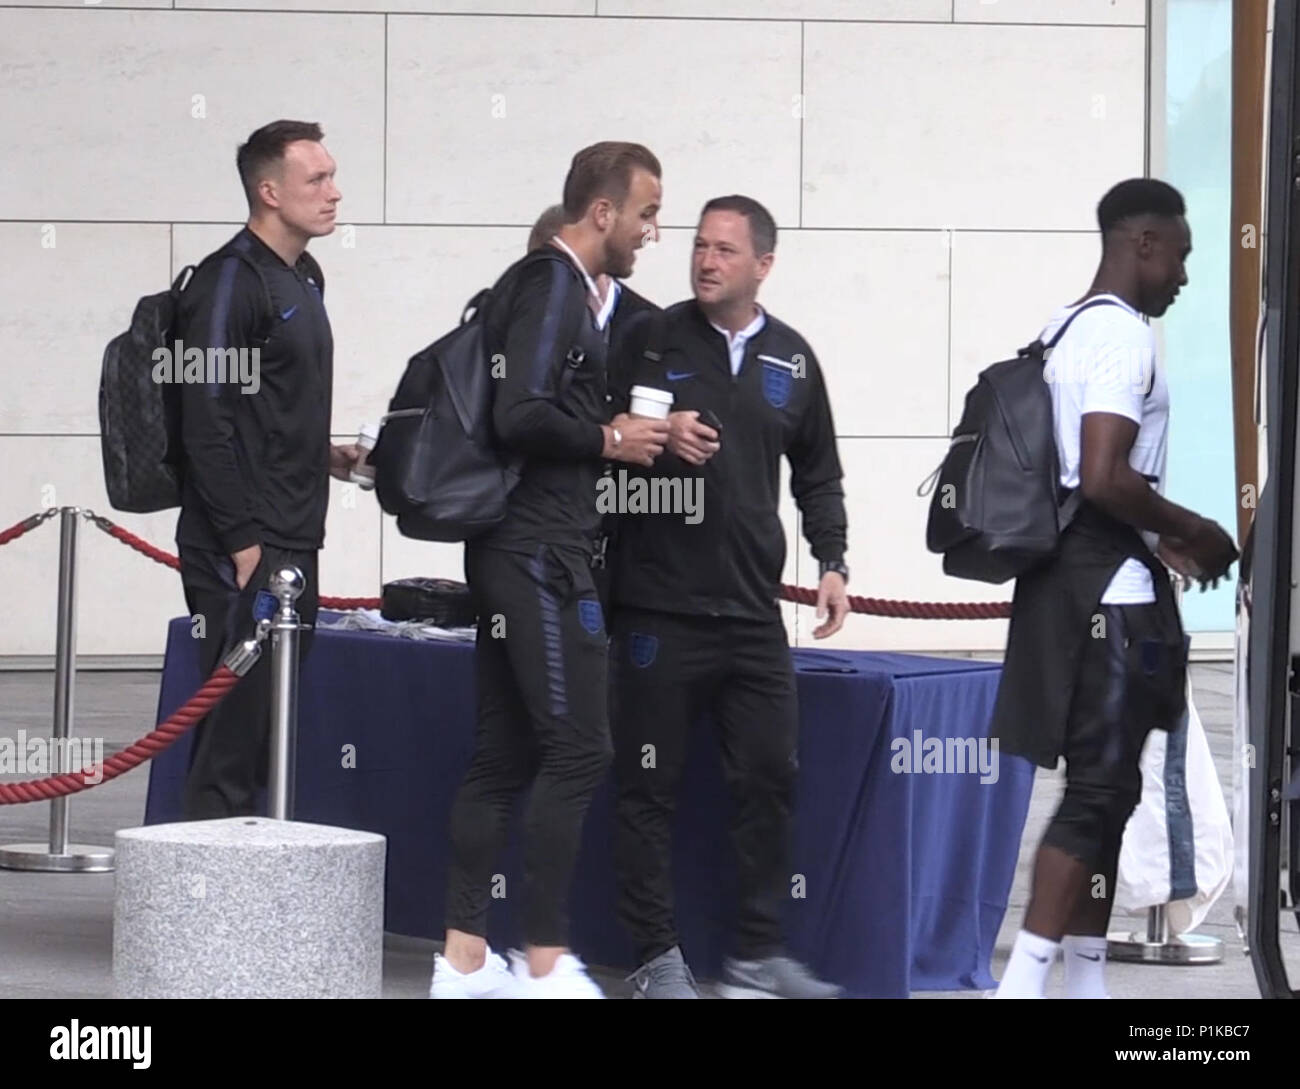 England's Phil Jones (left), Harry Kane (centre left) and Danny Welbeck (right) prepare to board the bus at St George's Park in Burton ahead of flying out to Russia for the 2018 FIFA World Cup. Stock Photo